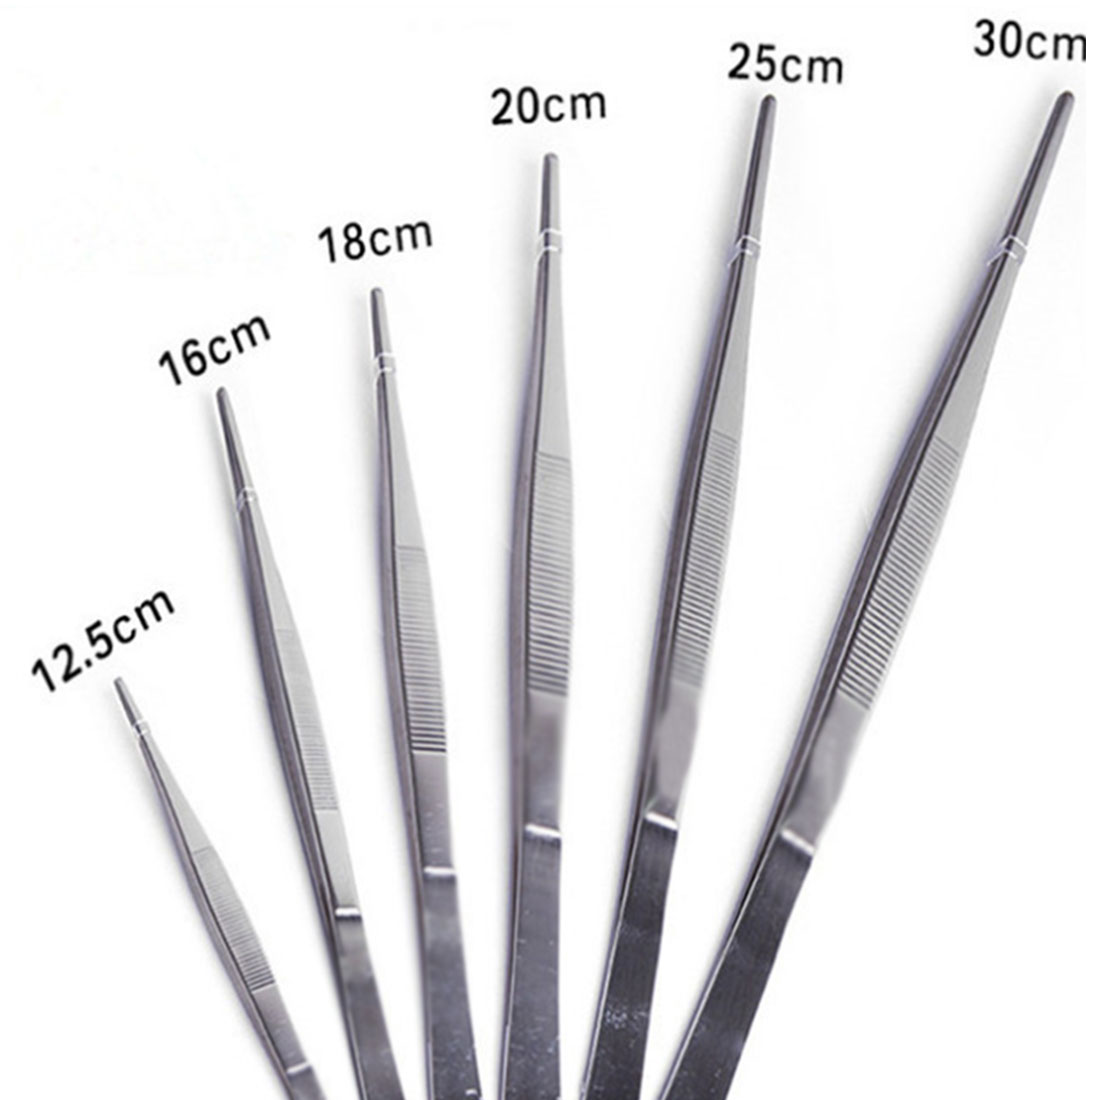 115mm Acute type high-strength ultrafine tweezers with rubber grip ANEX No.214 